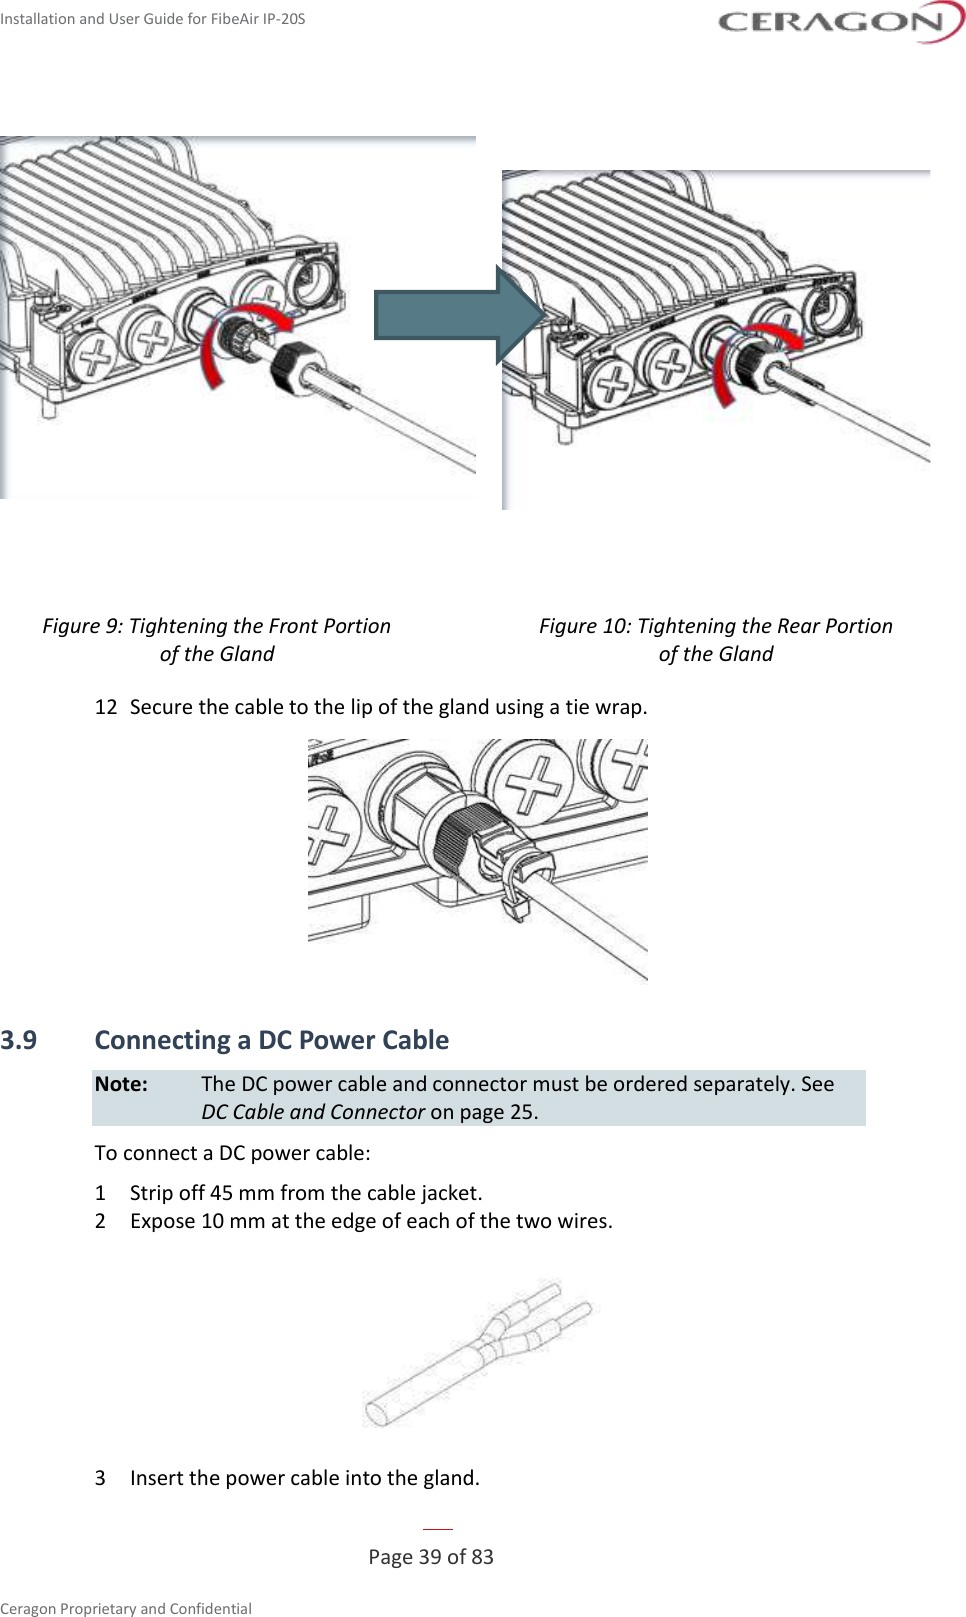 Installation and User Guide for FibeAir IP-20S   Page 39 of 83  Ceragon Proprietary and Confidential       Figure 9: Tightening the Front Portion  of the Gland Figure 10: Tightening the Rear Portion  of the Gland  12  Secure the cable to the lip of the gland using a tie wrap.  3.9 Connecting a DC Power Cable Note:  The DC power cable and connector must be ordered separately. See DC Cable and Connector on page 25. To connect a DC power cable: 1  Strip off 45 mm from the cable jacket. 2  Expose 10 mm at the edge of each of the two wires.  3  Insert the power cable into the gland. 